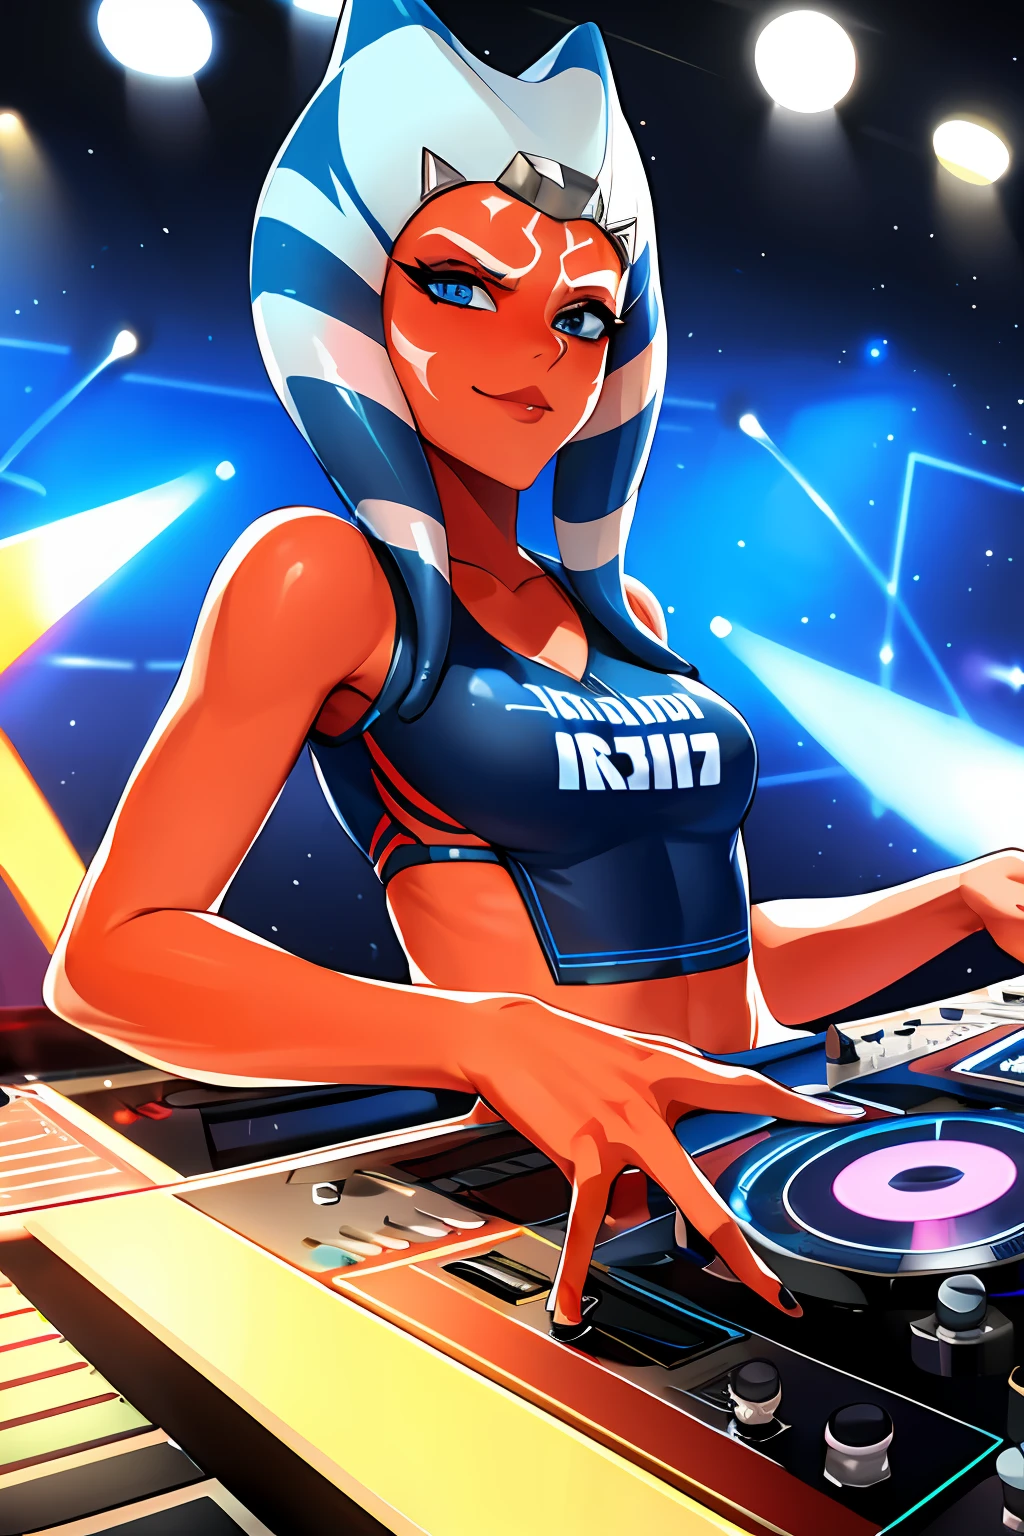 "A solo shot featuring 1girl, blue eyes, orange skin, tentacle hair a DJ, showcasing her skills on the turntables at a vibrant rave."